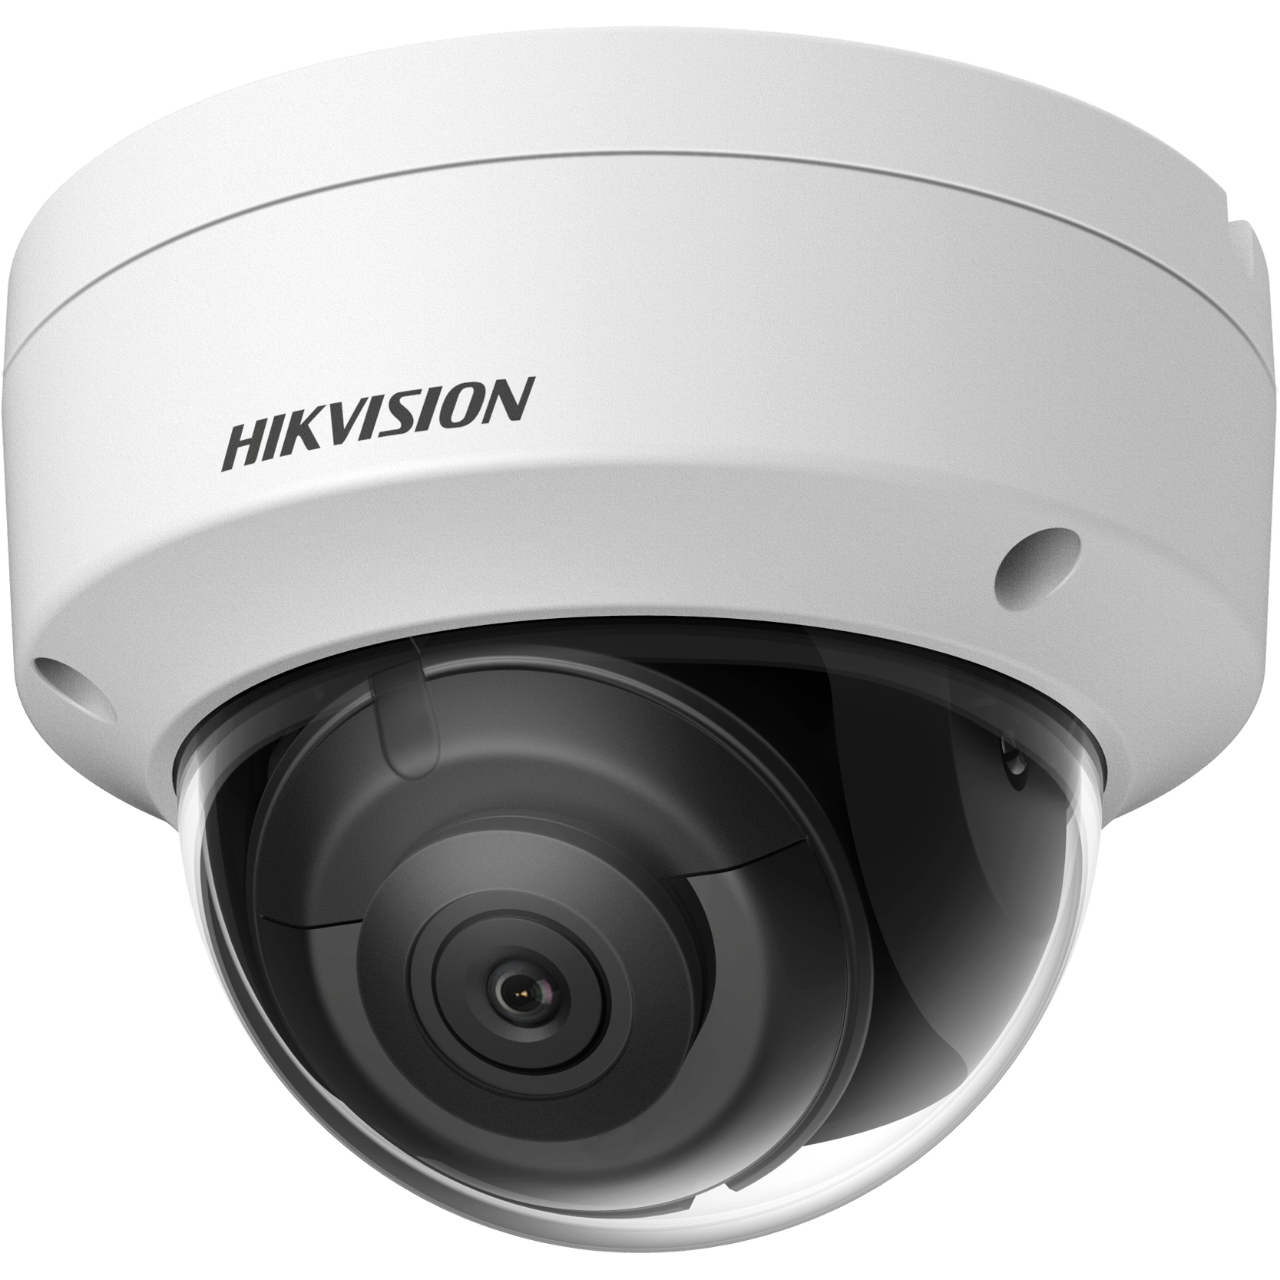 20000568 Hikvision Pro Series EasyIP 2.0+ Gen2 4MP WDR Mini IR Dome IP Camera, 4mm